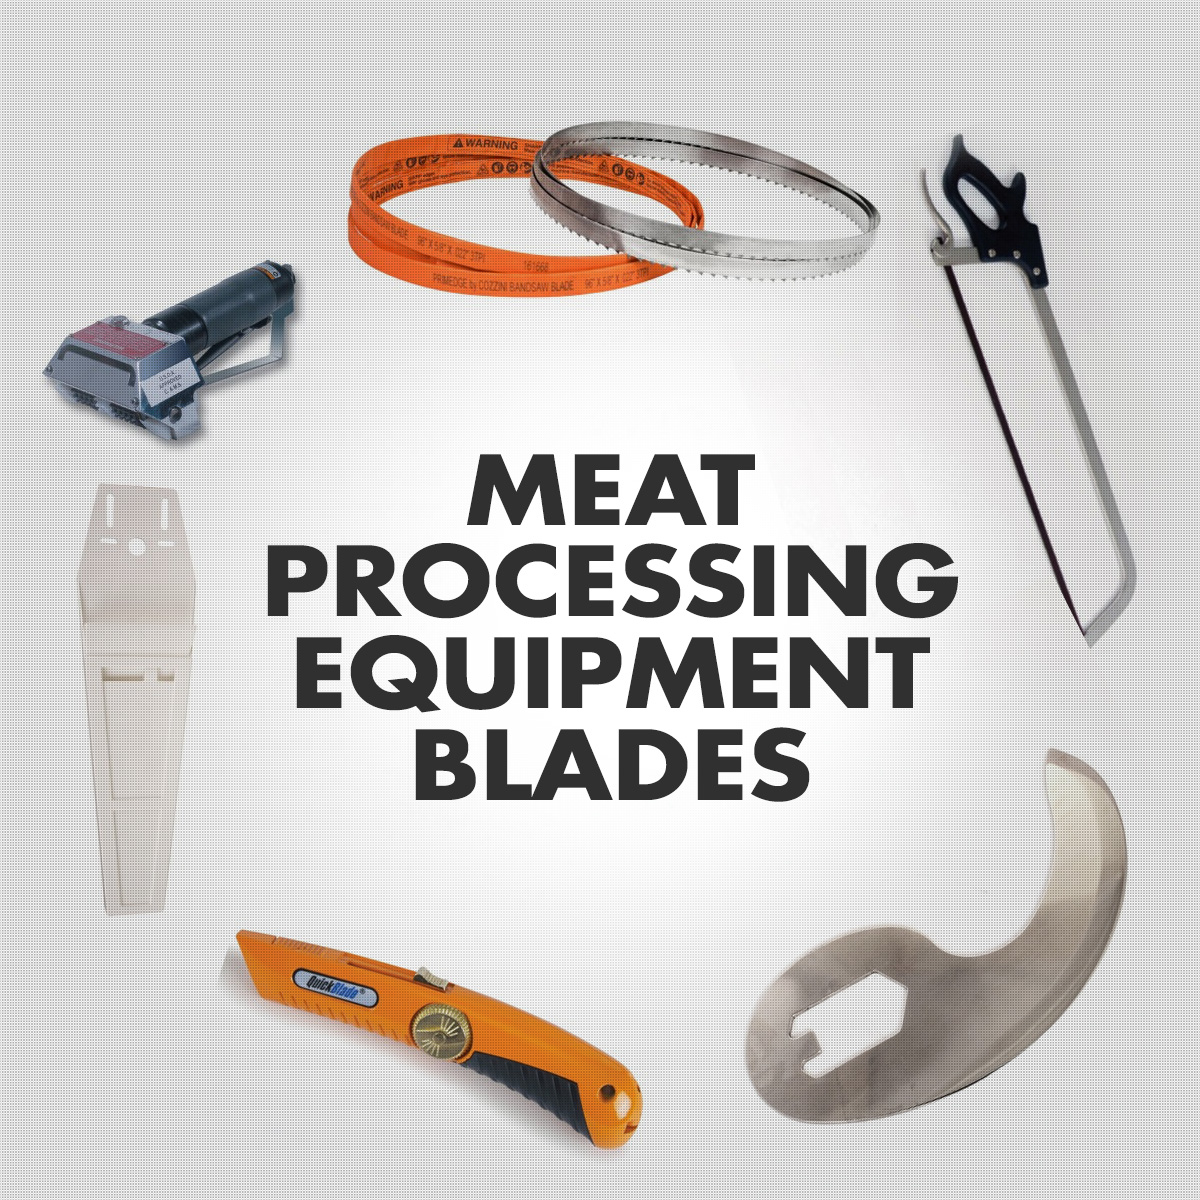 Meat Processing Equipment Blades - Bandsaw, Handsaw, Etc.